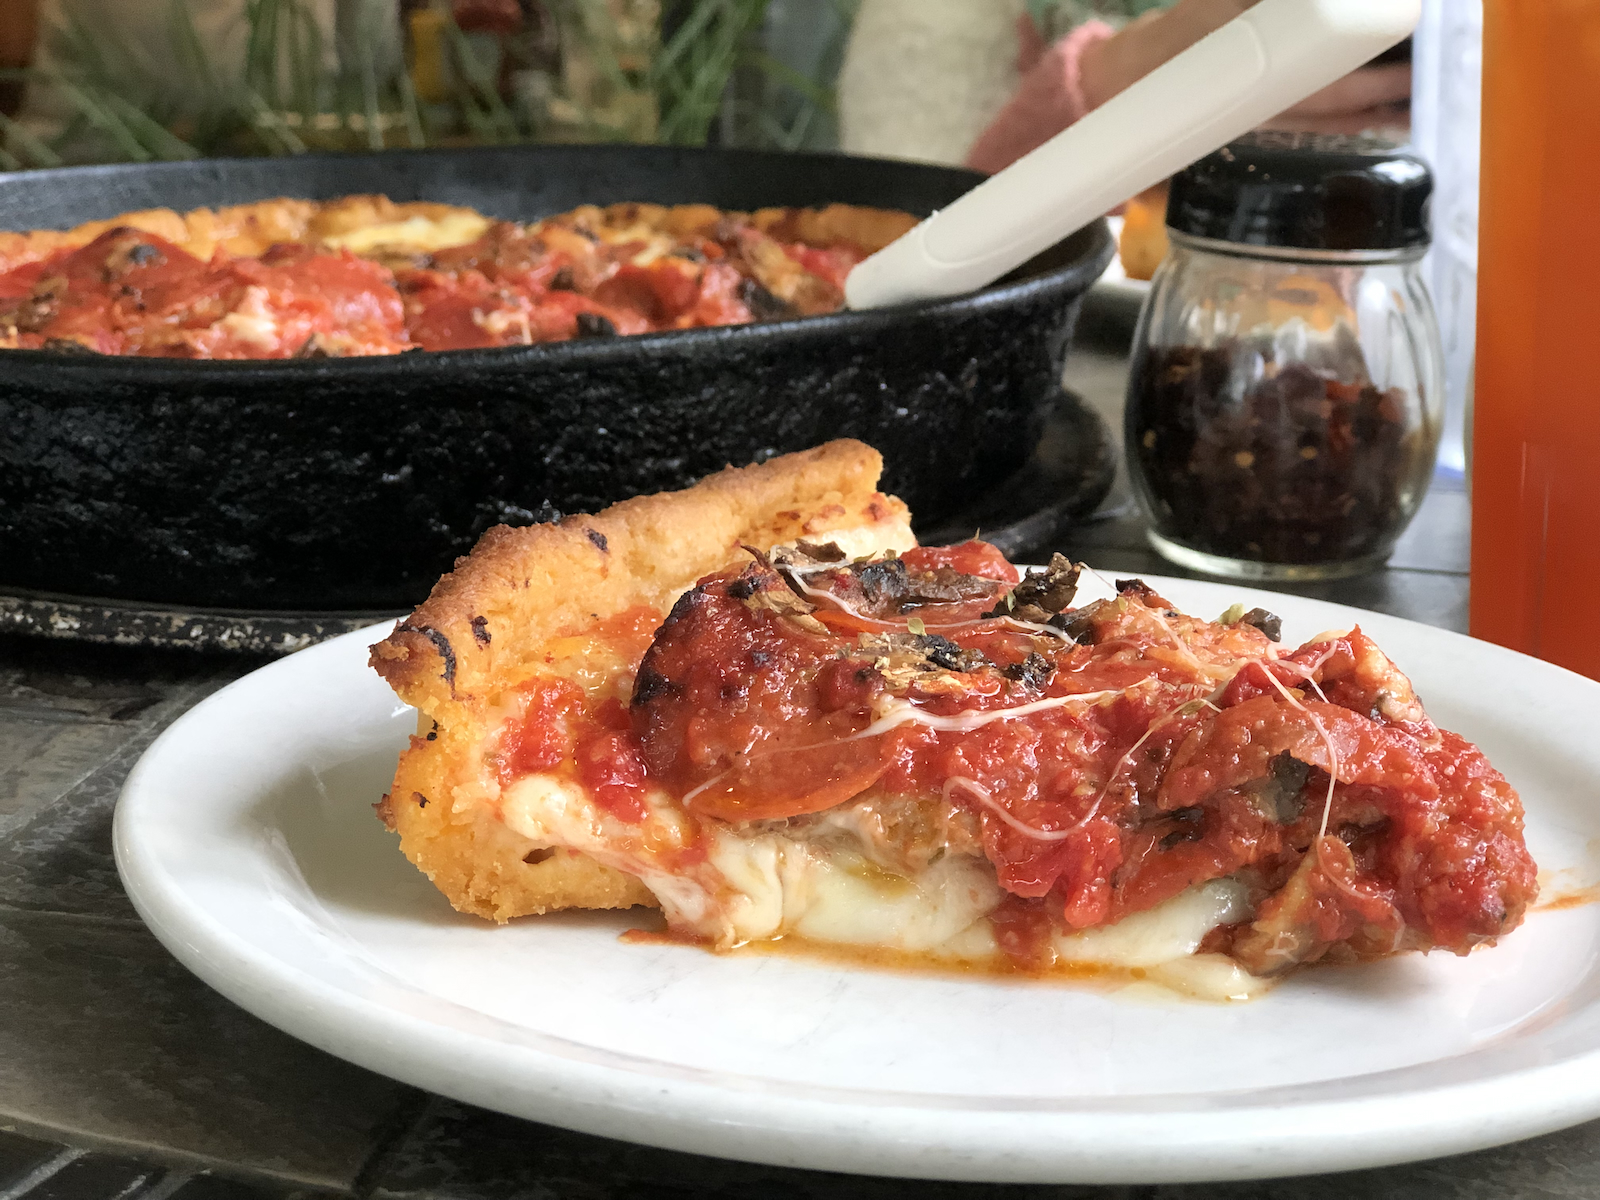 Chicago-style pizza from Chuck's Place